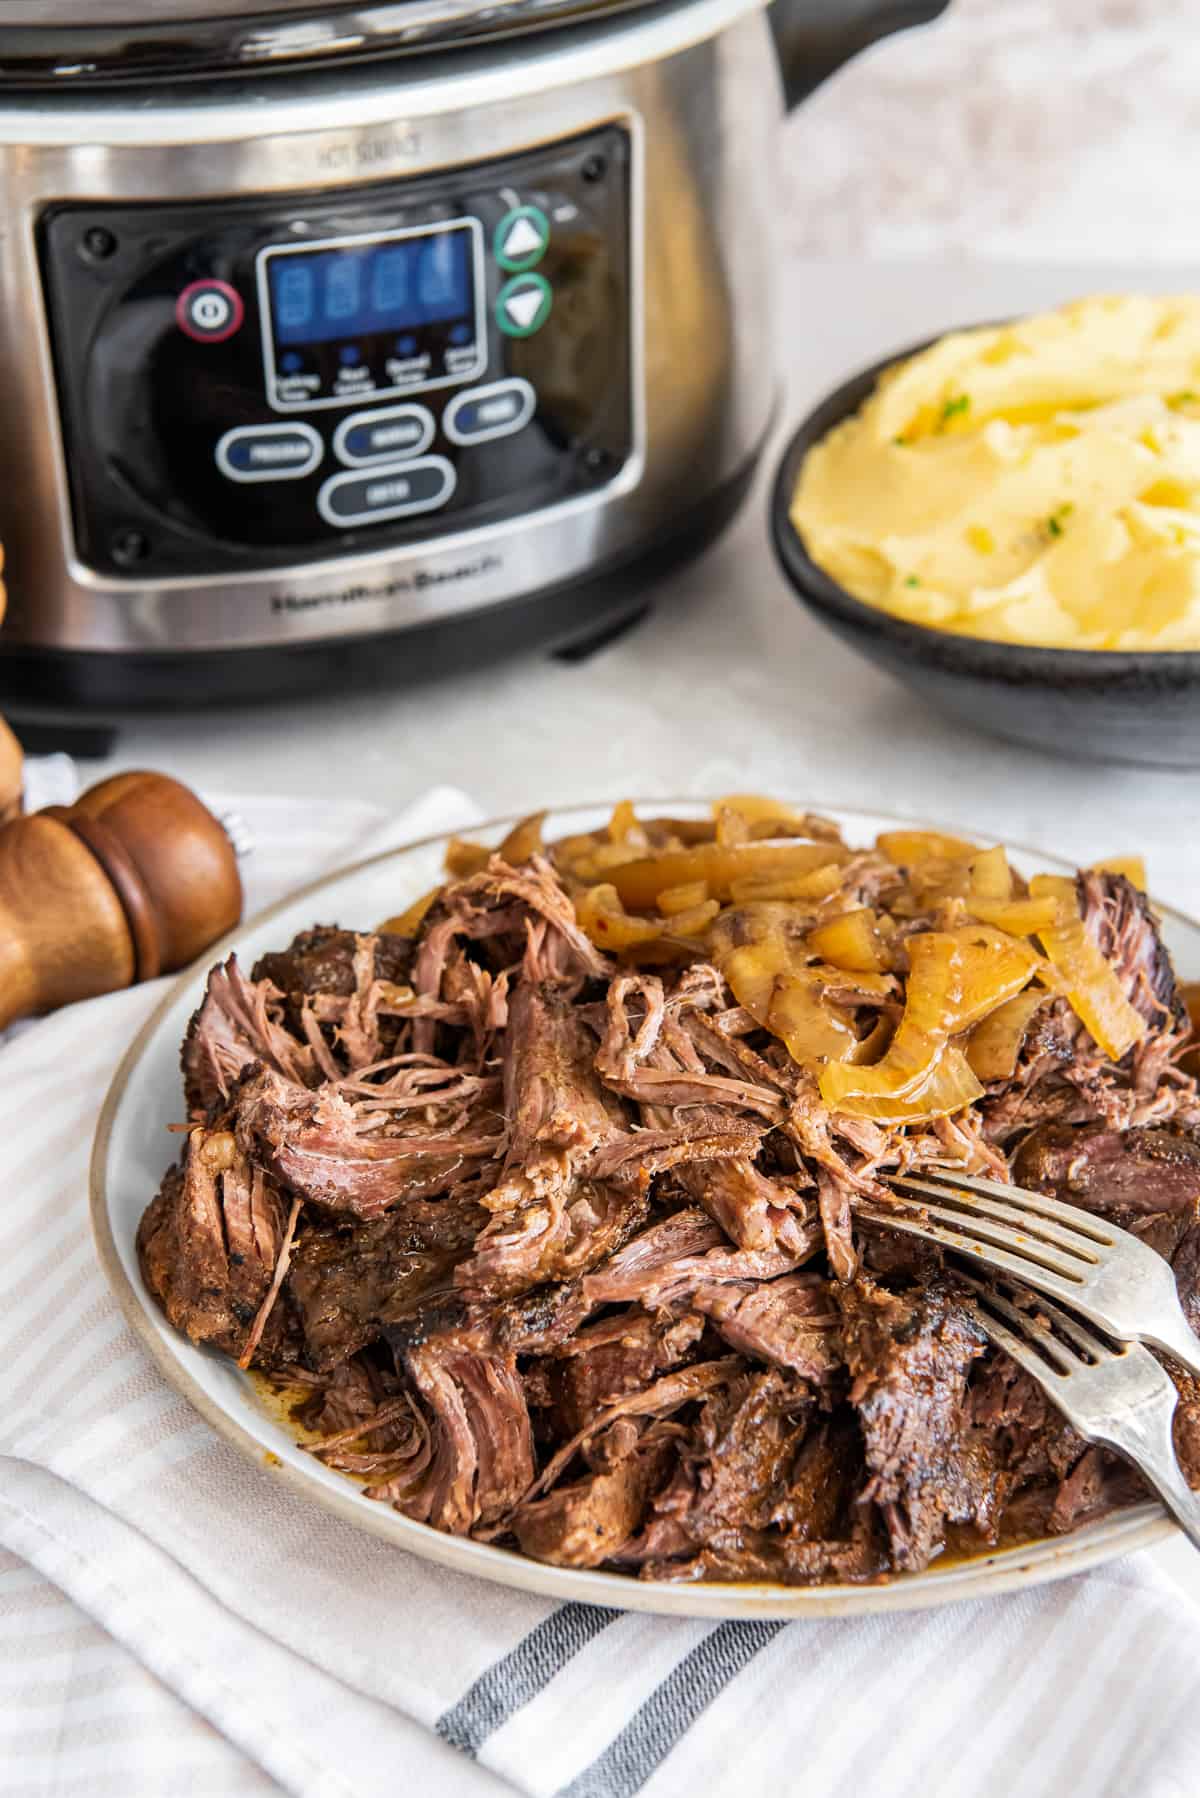 Shredded green chile beef with onions on a plate in front of a slow cooker.